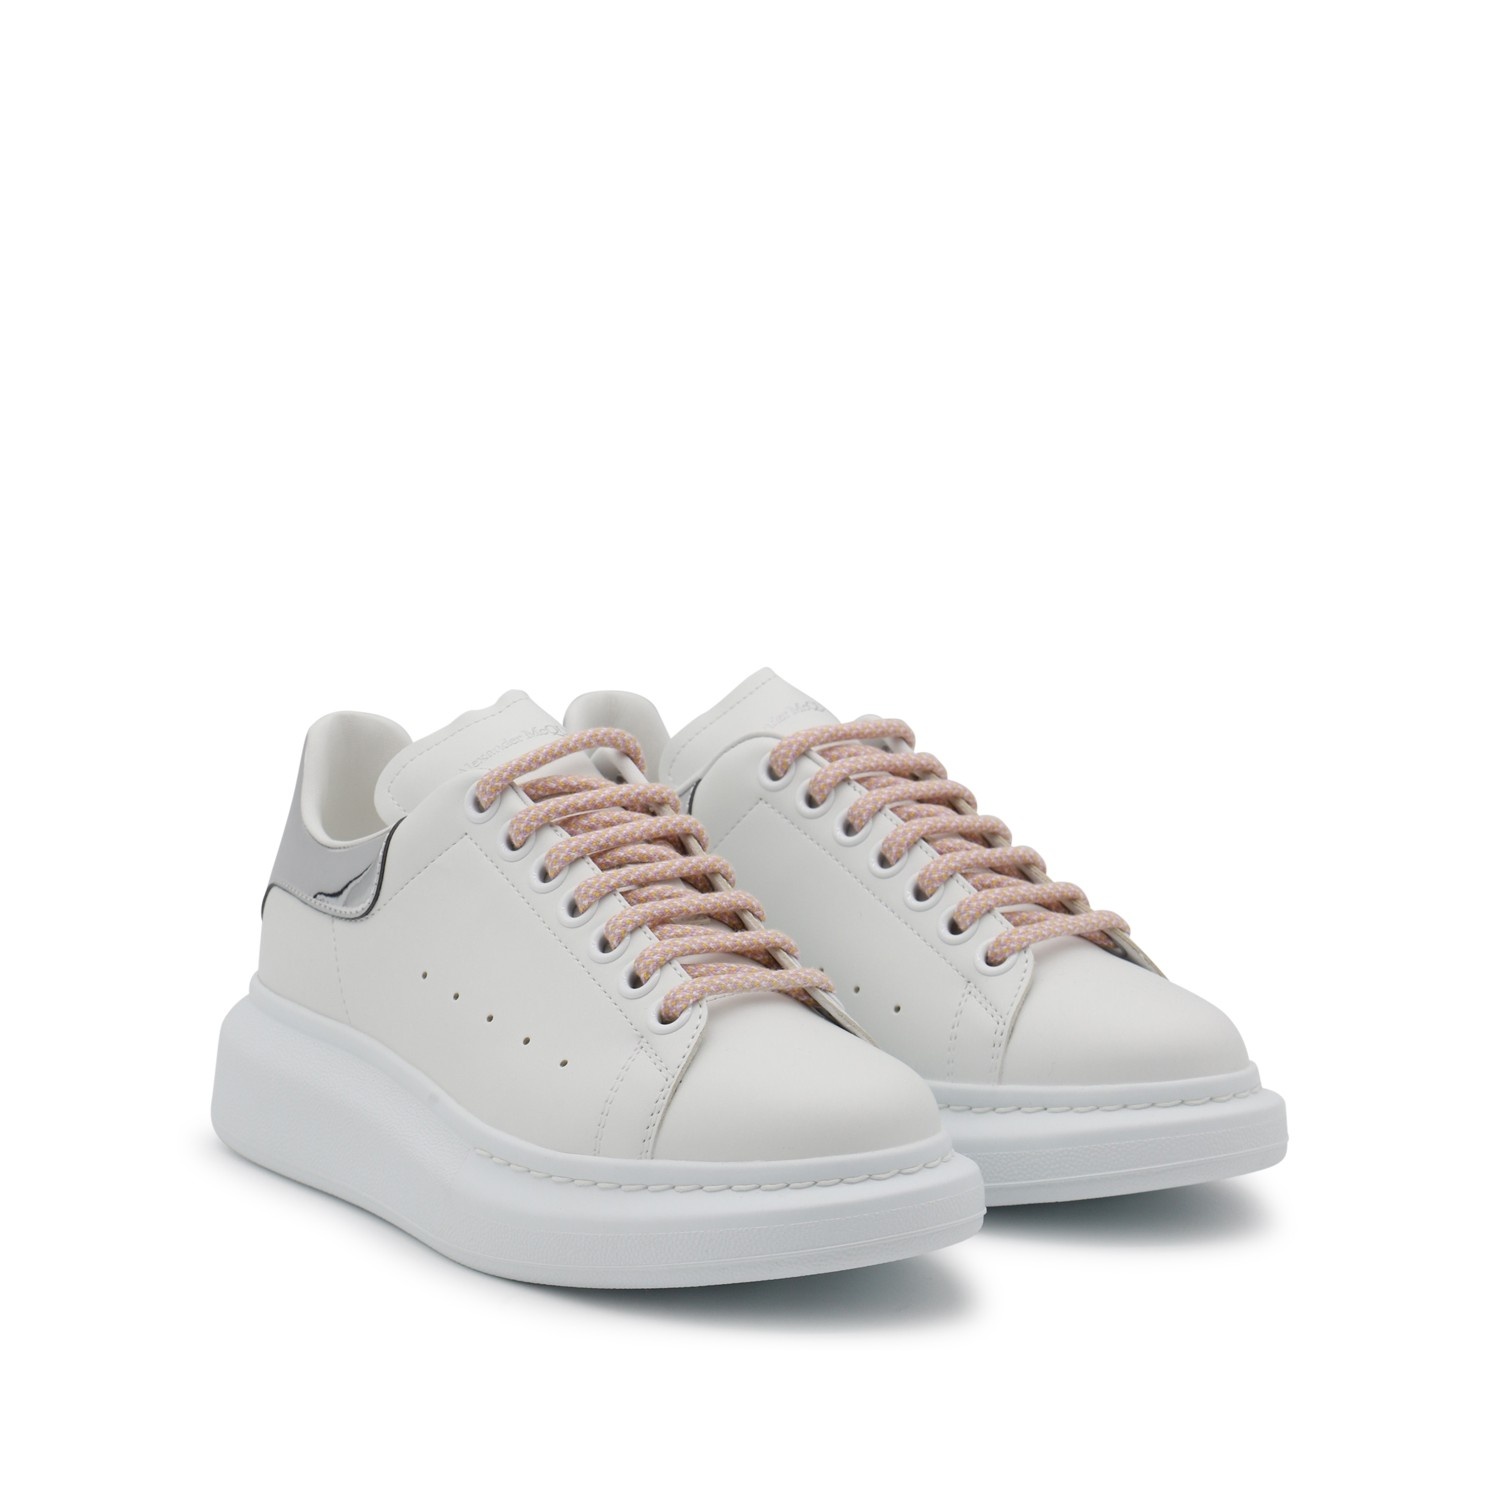 WHITE, PINK AND SILVER-TONE LEATHER OVERSIZED SNEAKERS - 2